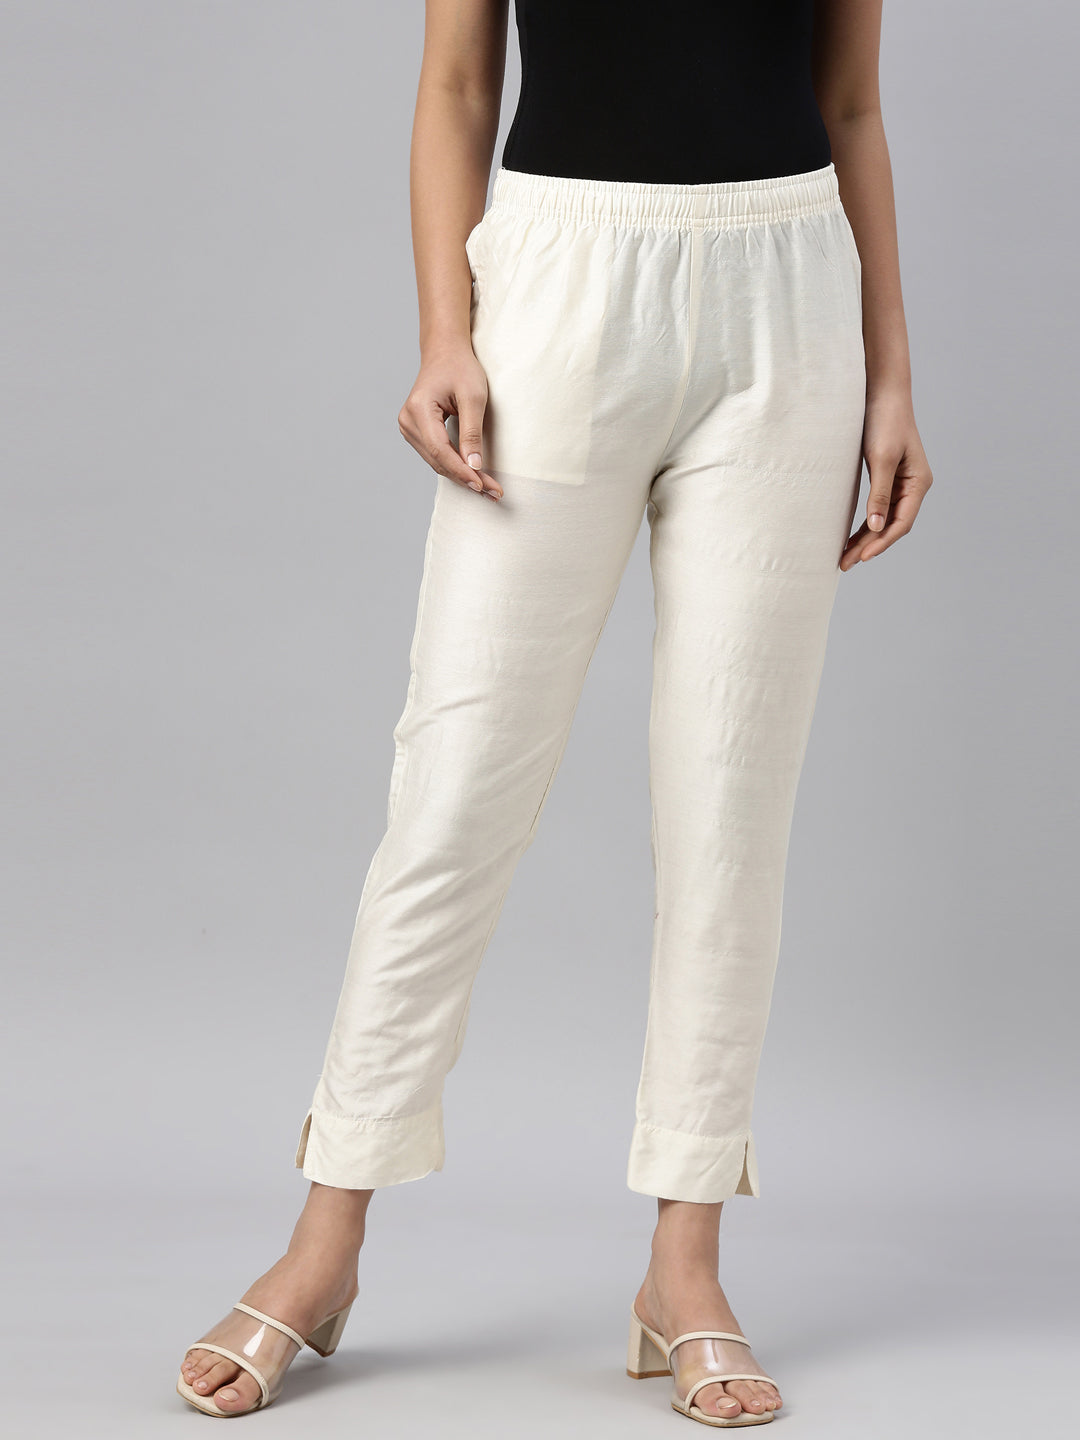 Amy Lynn Lupe pants in textured metallic gold - Something about Sofia